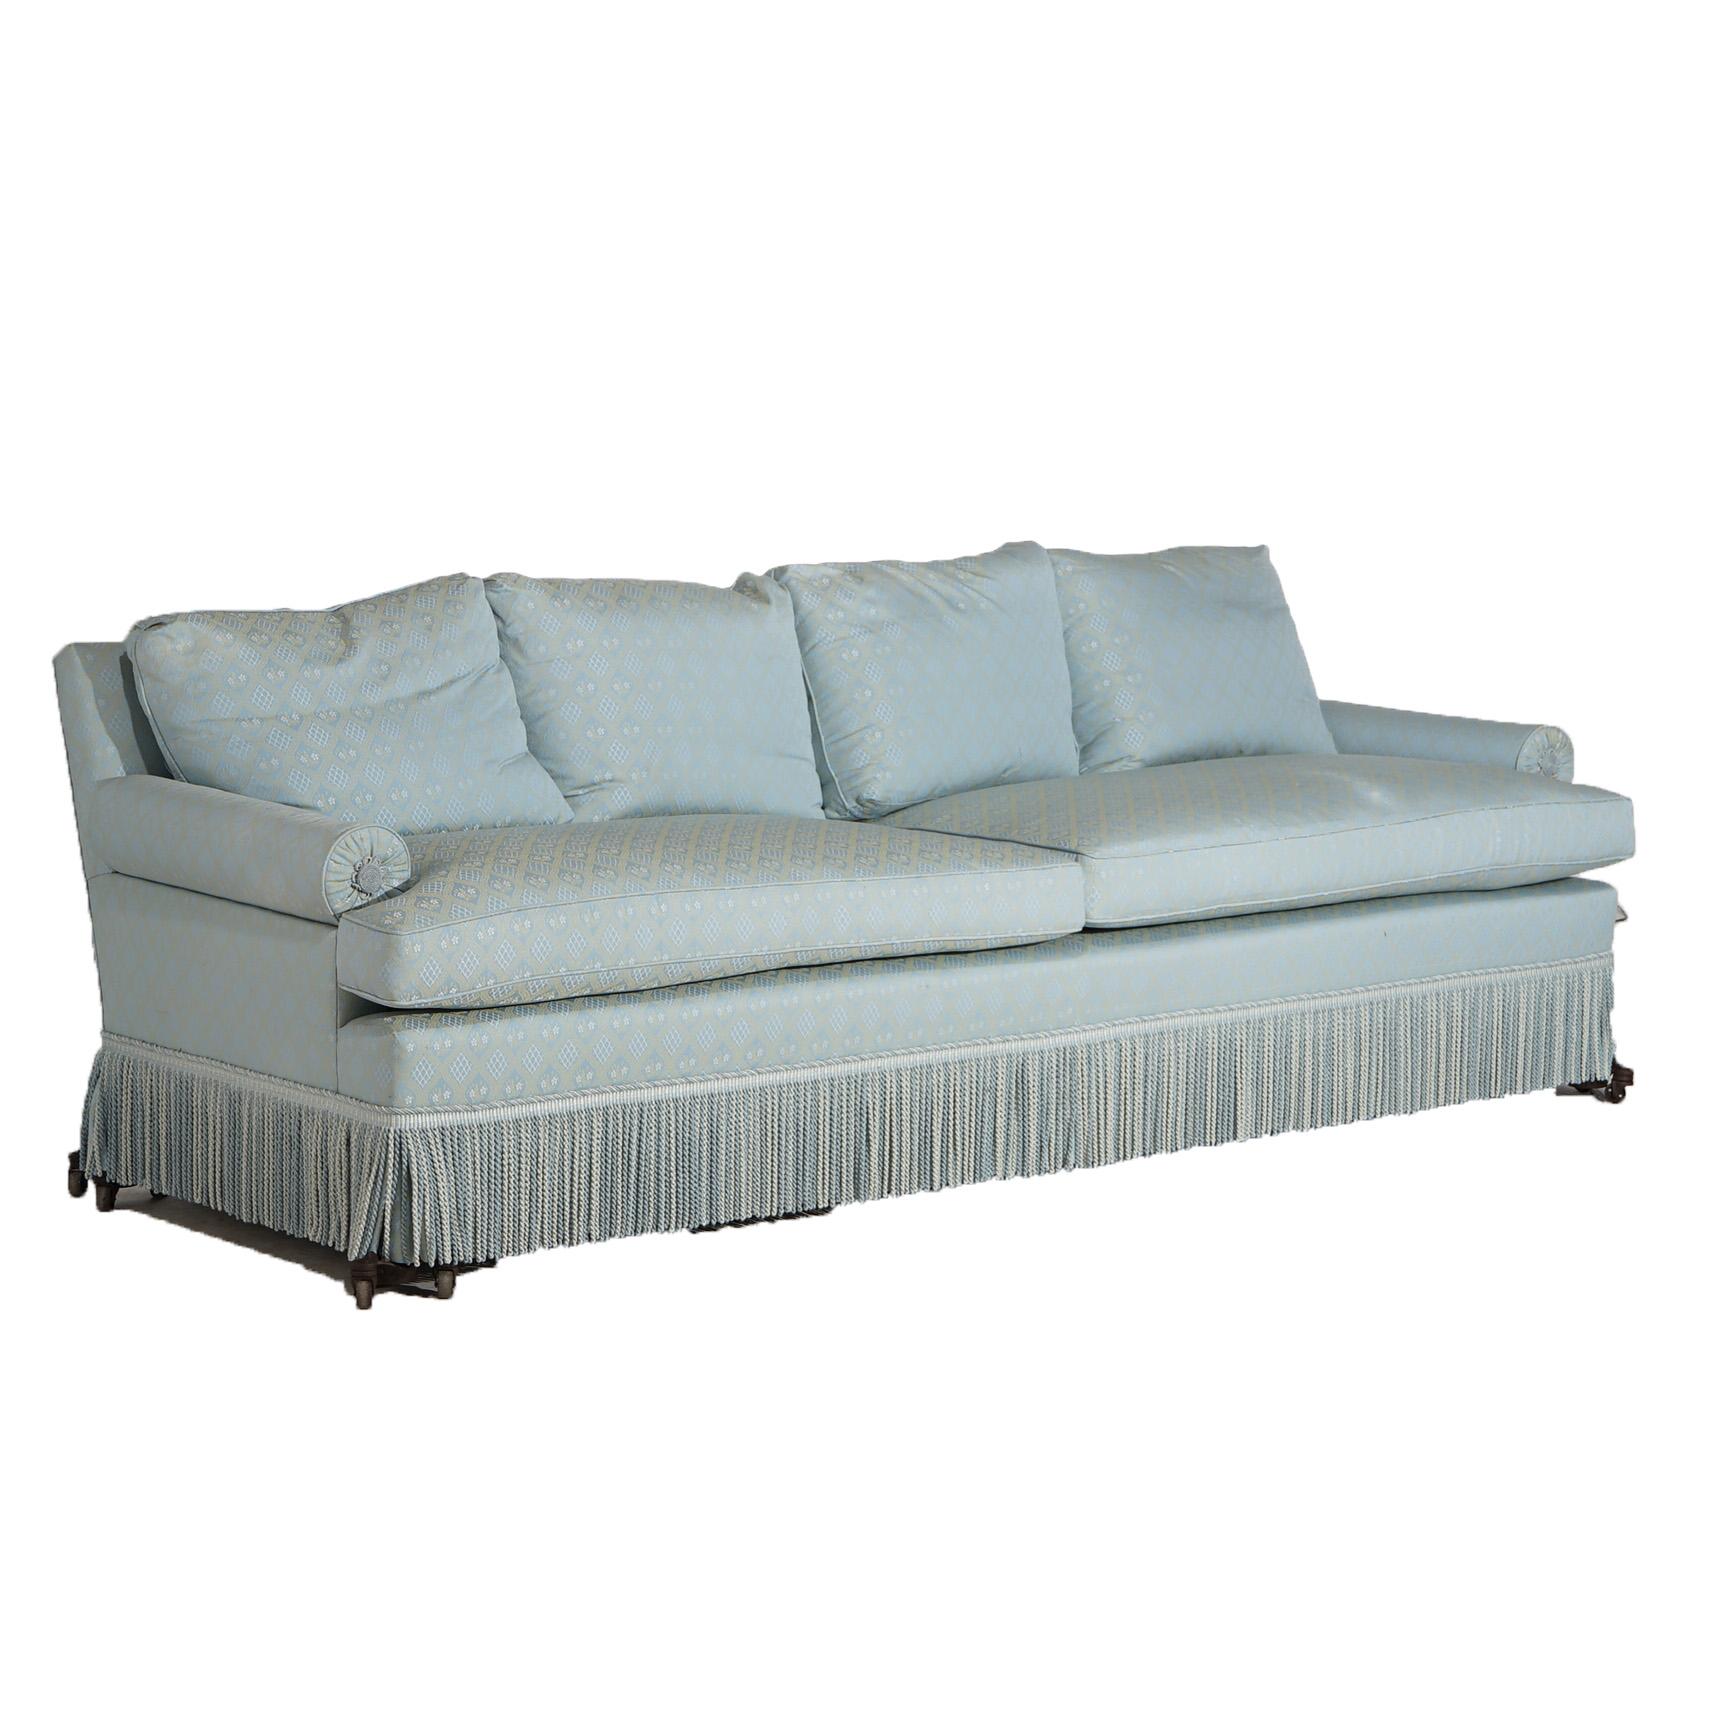 ***Ask About Reduced In-House Shipping Rates - Reliable Service & Fully Insured***
Hollywood Regency Upholstered Pillow Back Long Sofa with Fringe Skirt 20thC

Measures- 34.5''H x 97''W x 35.5''D; SH 19.5